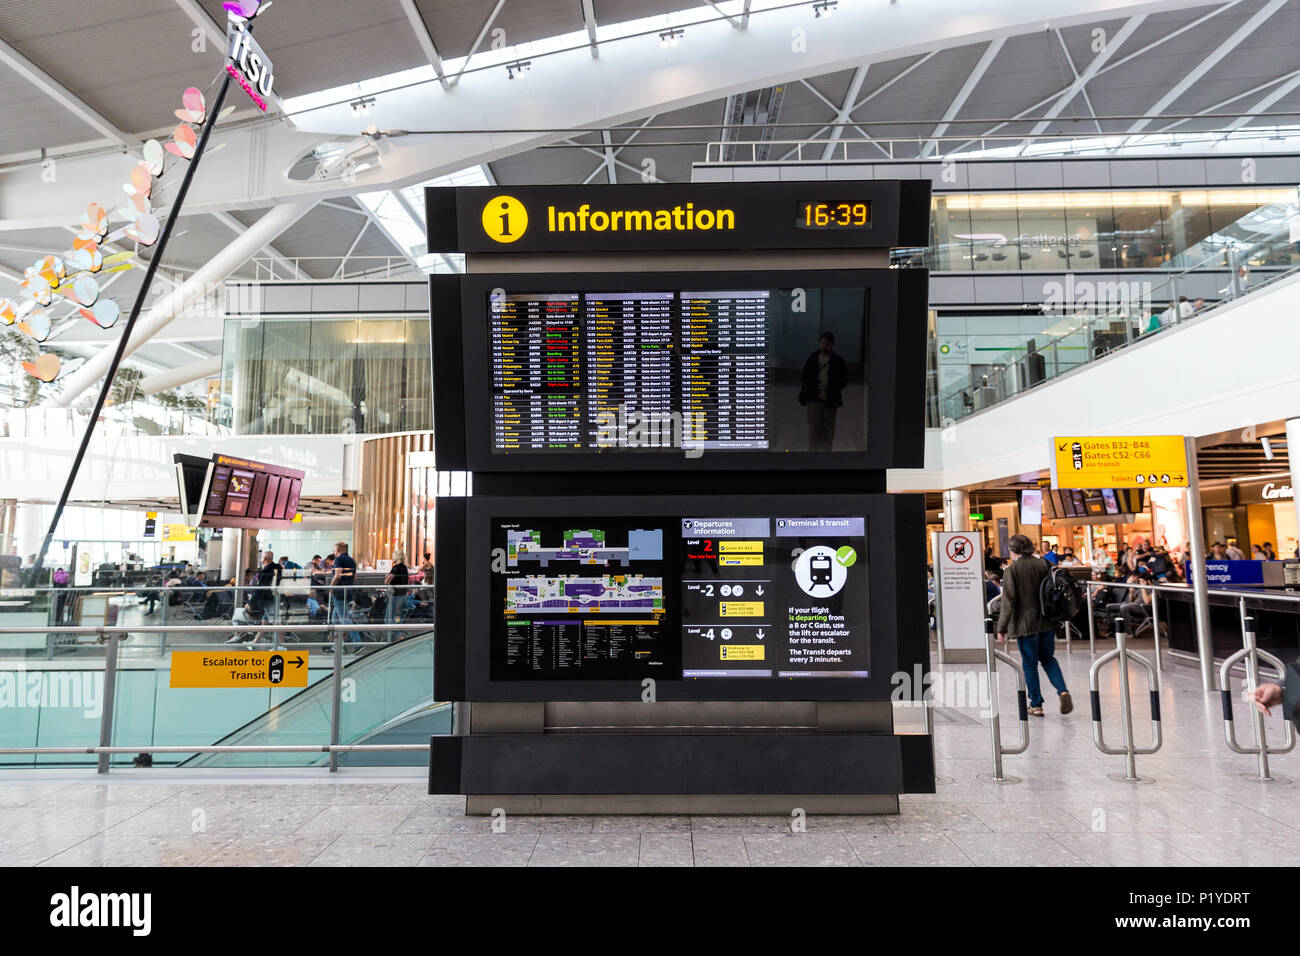 LONDON - MAY 27, 2018: Departures information board at London Heathrow airport terminal Stock Photo